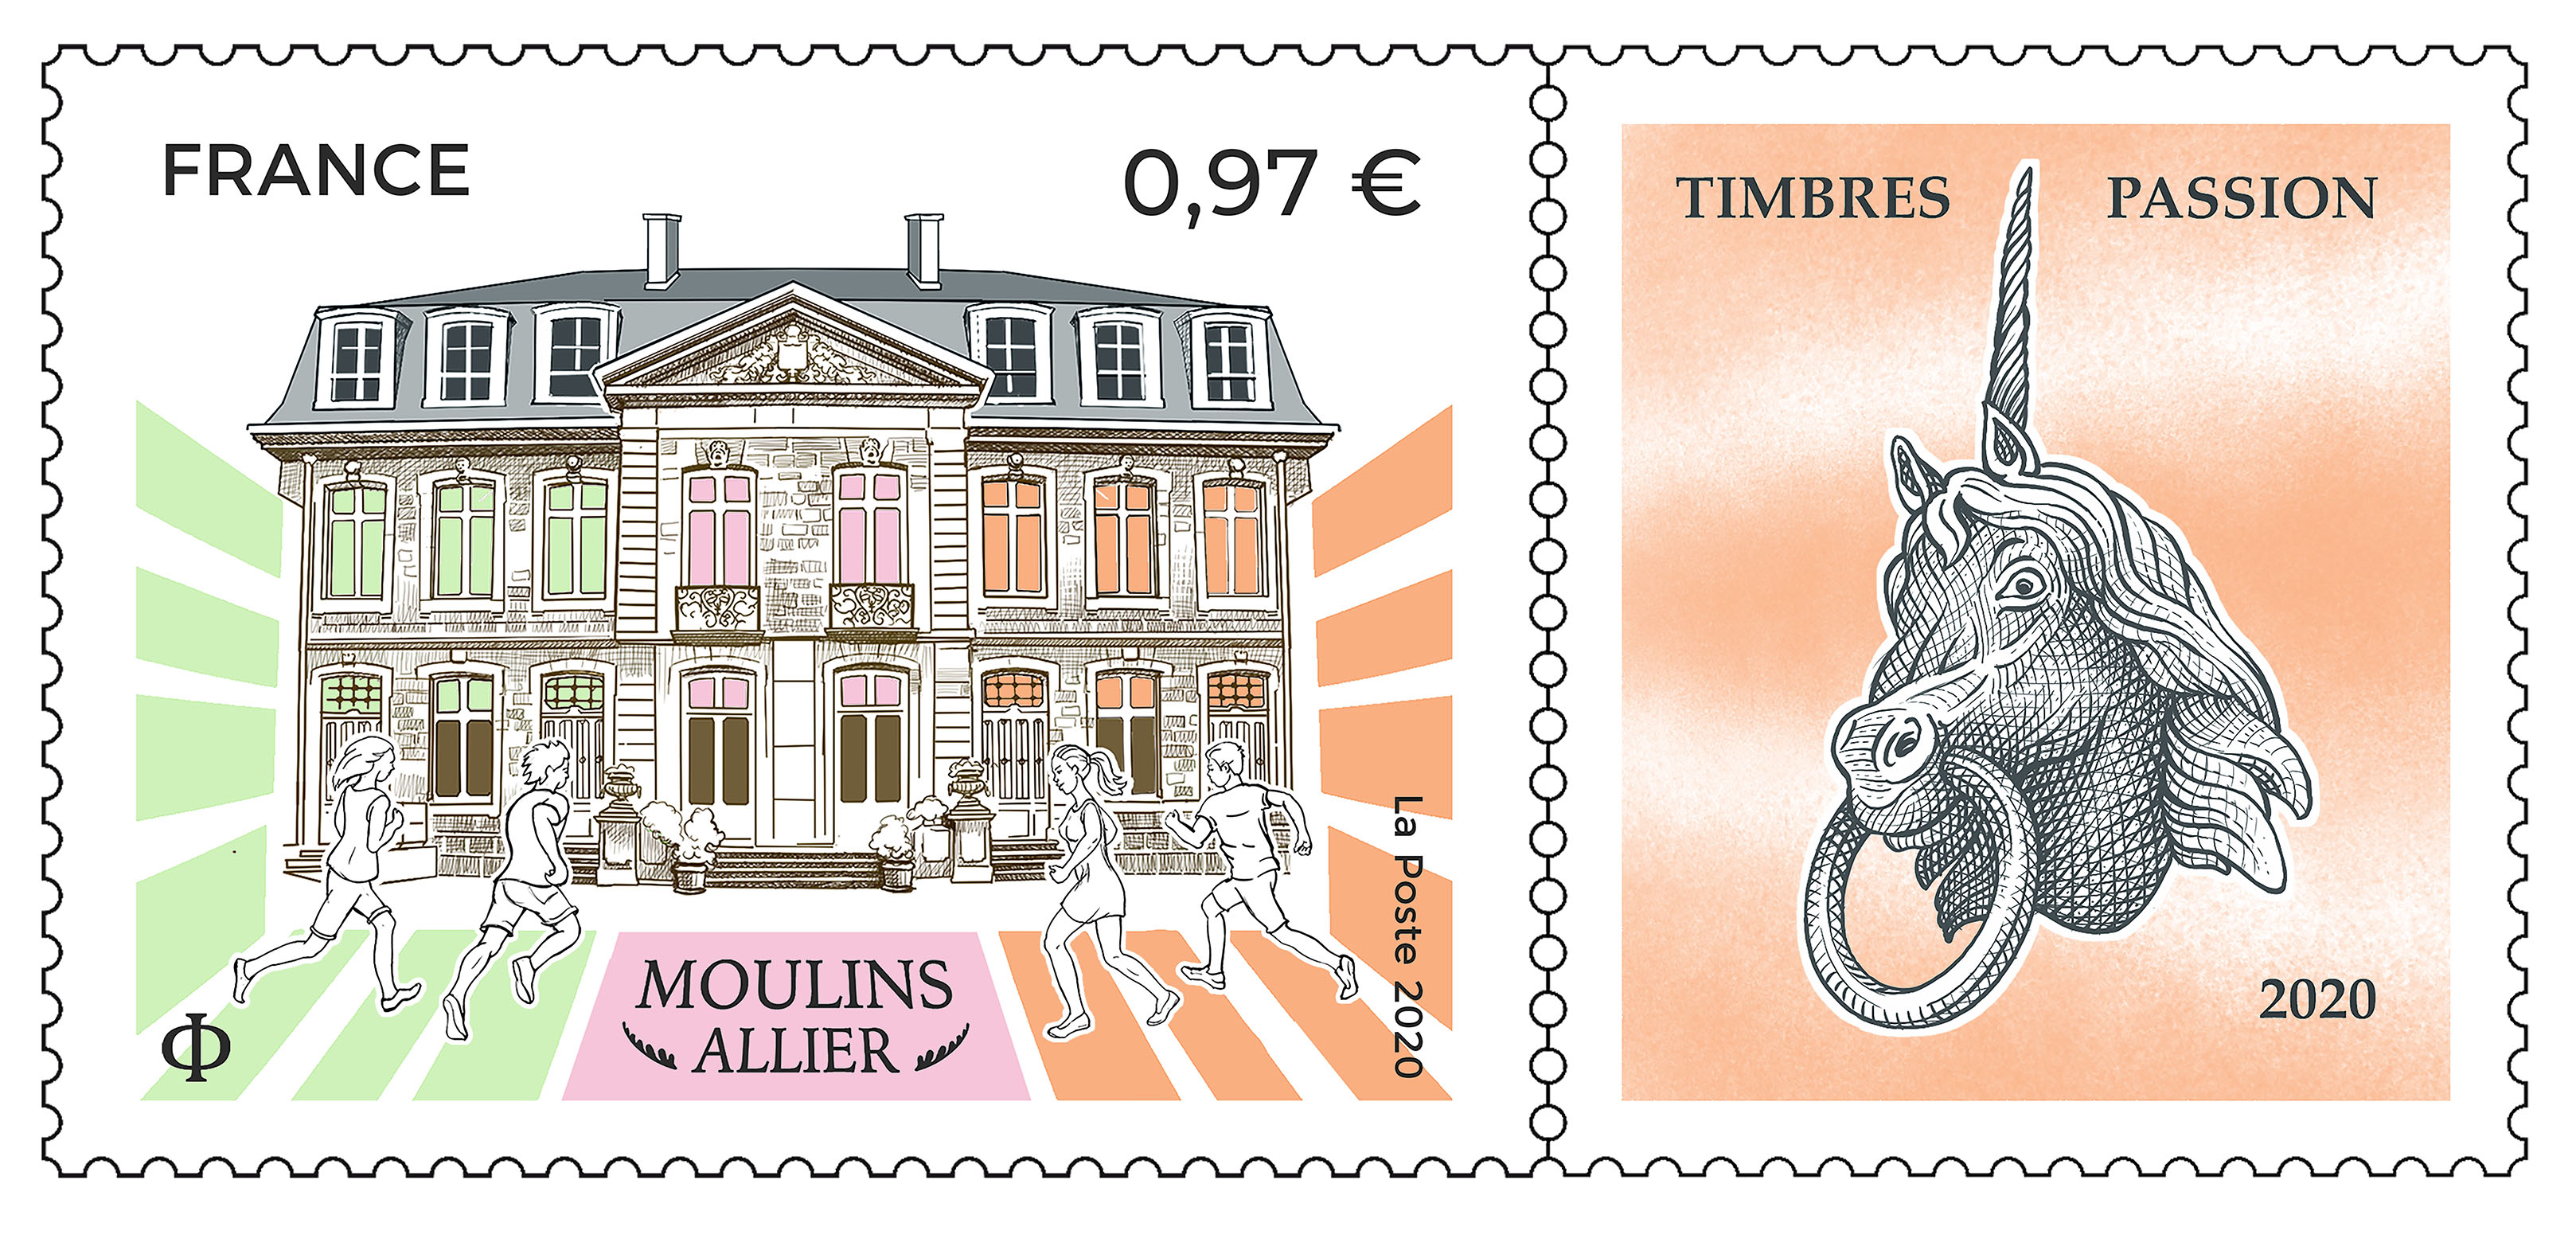 Moulin Allier - Timbres passion